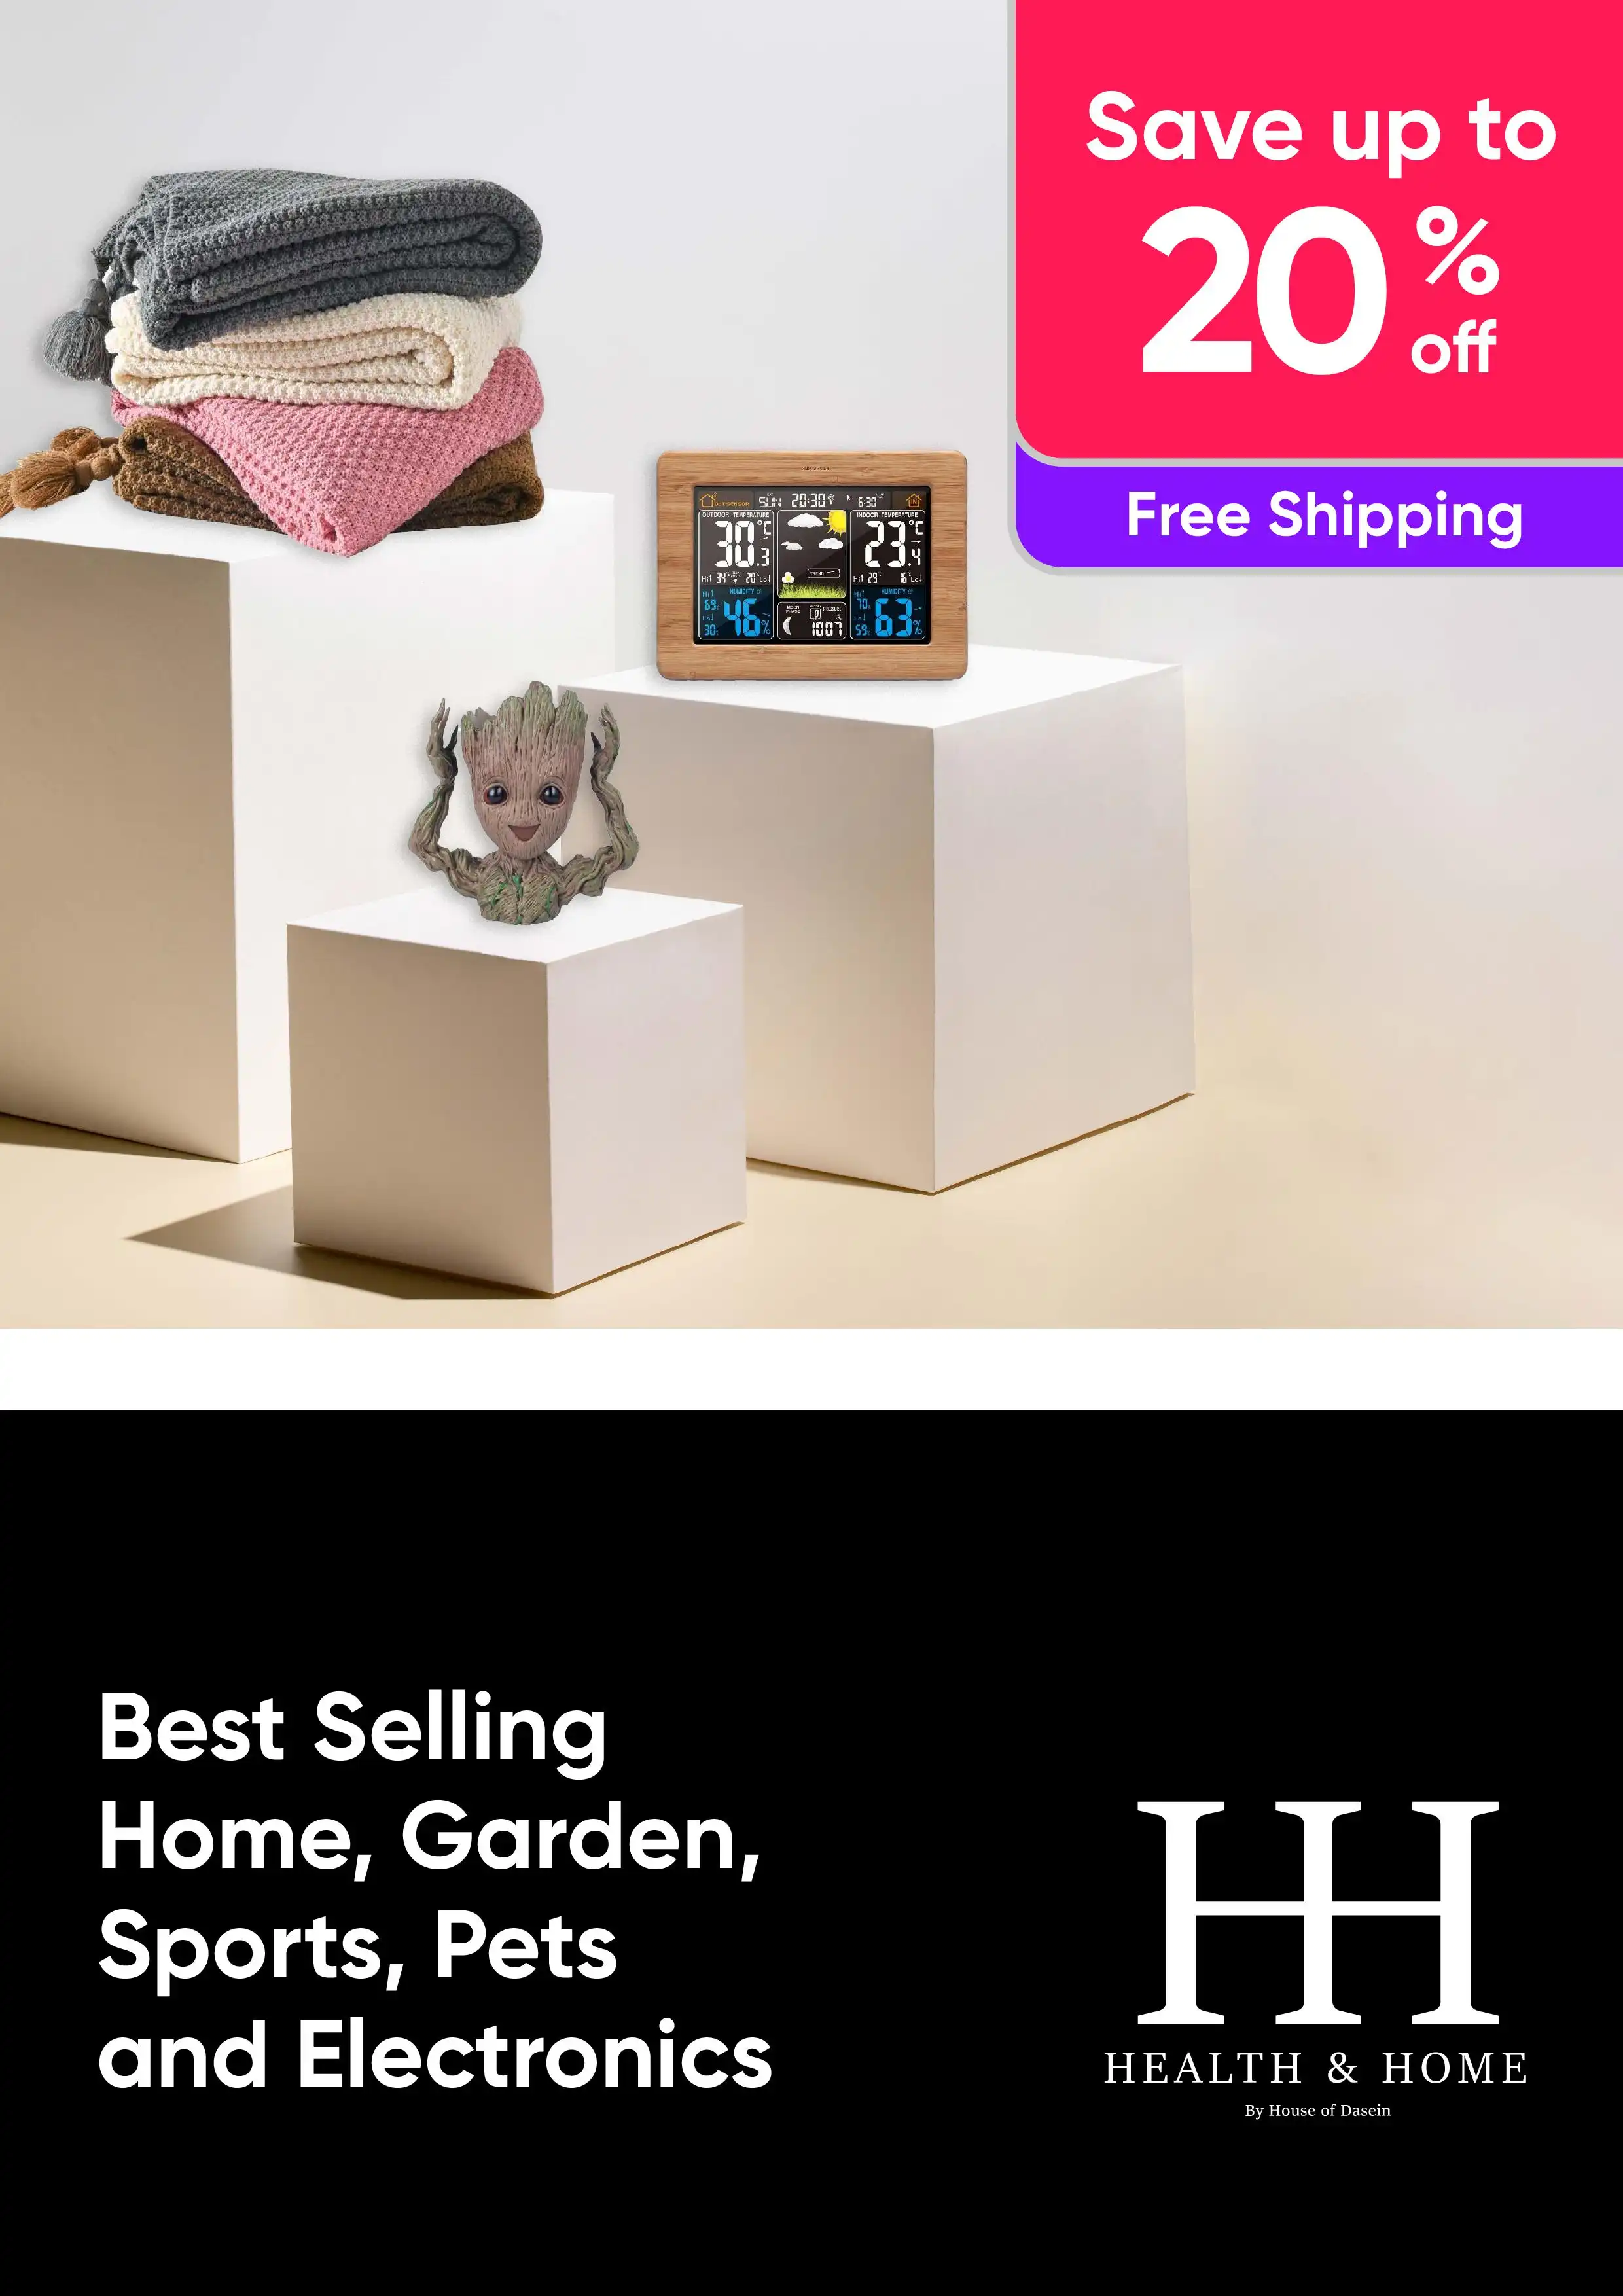 Save Up to 20% off Best Selling Home and Garden, Sports, Pets and Electronics